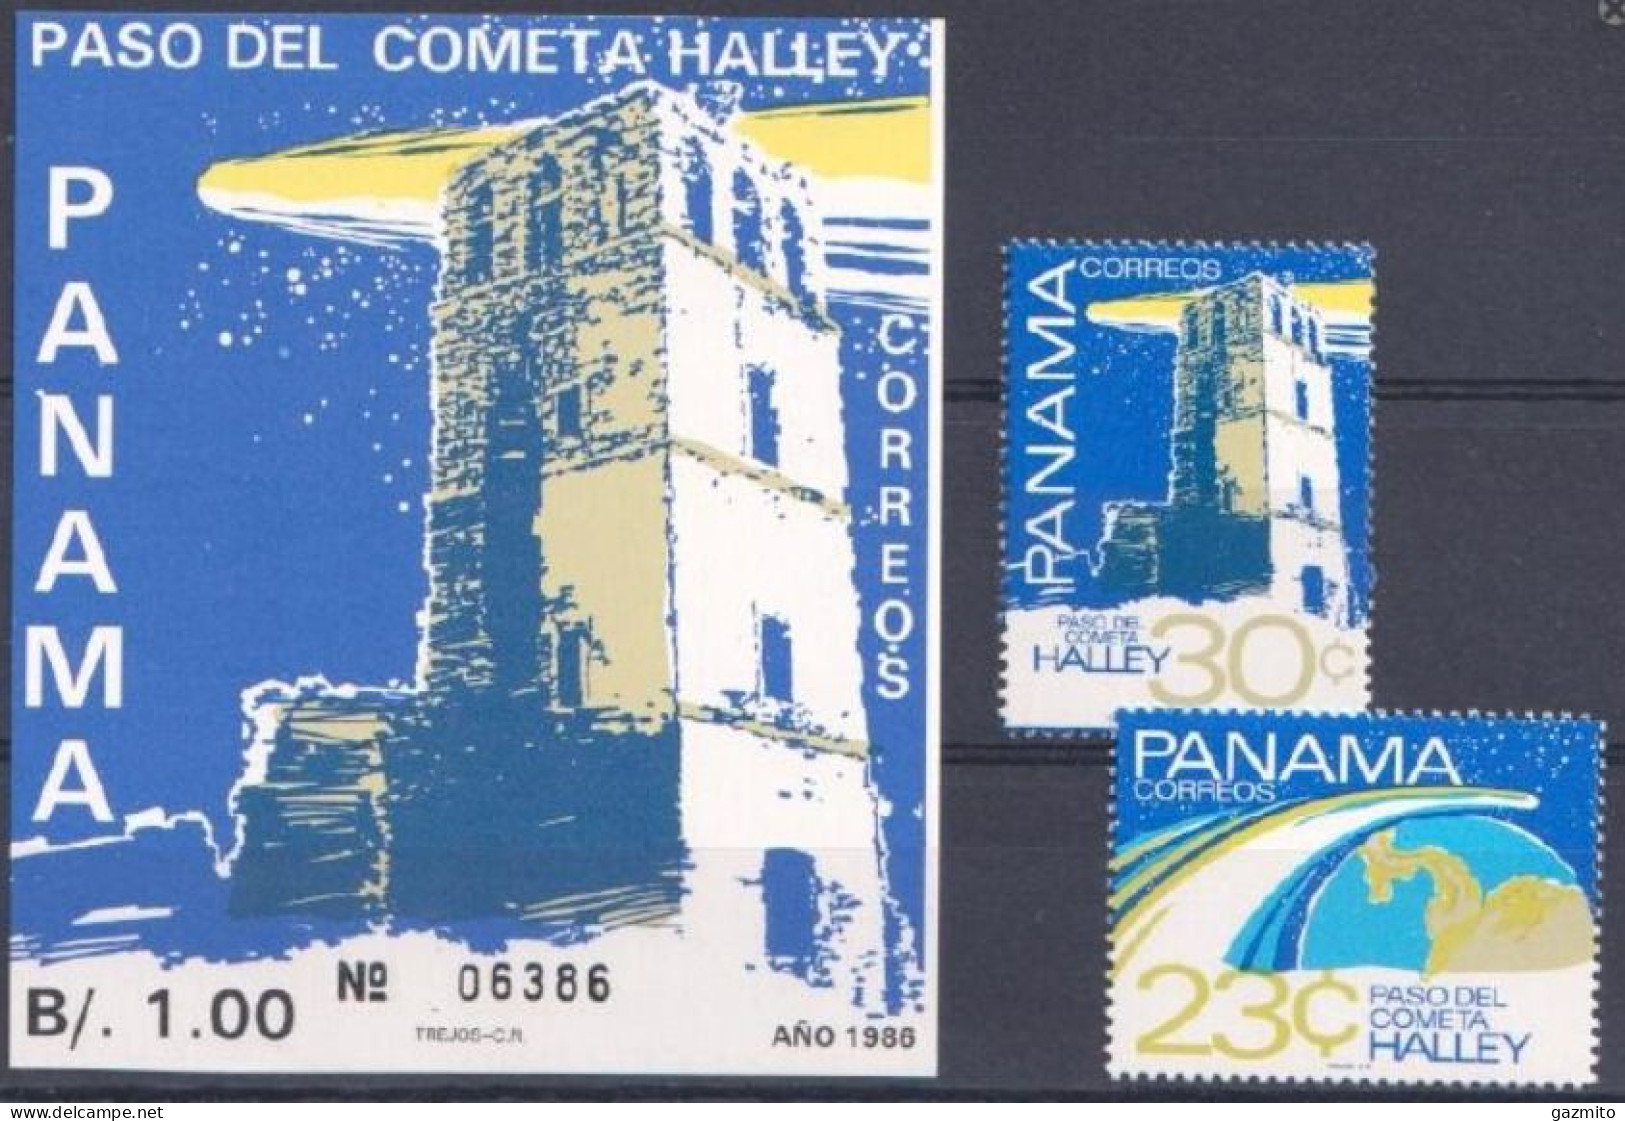 Panama 1986, Appearance Of Halley's Comet, 2val+BF - Astronomie